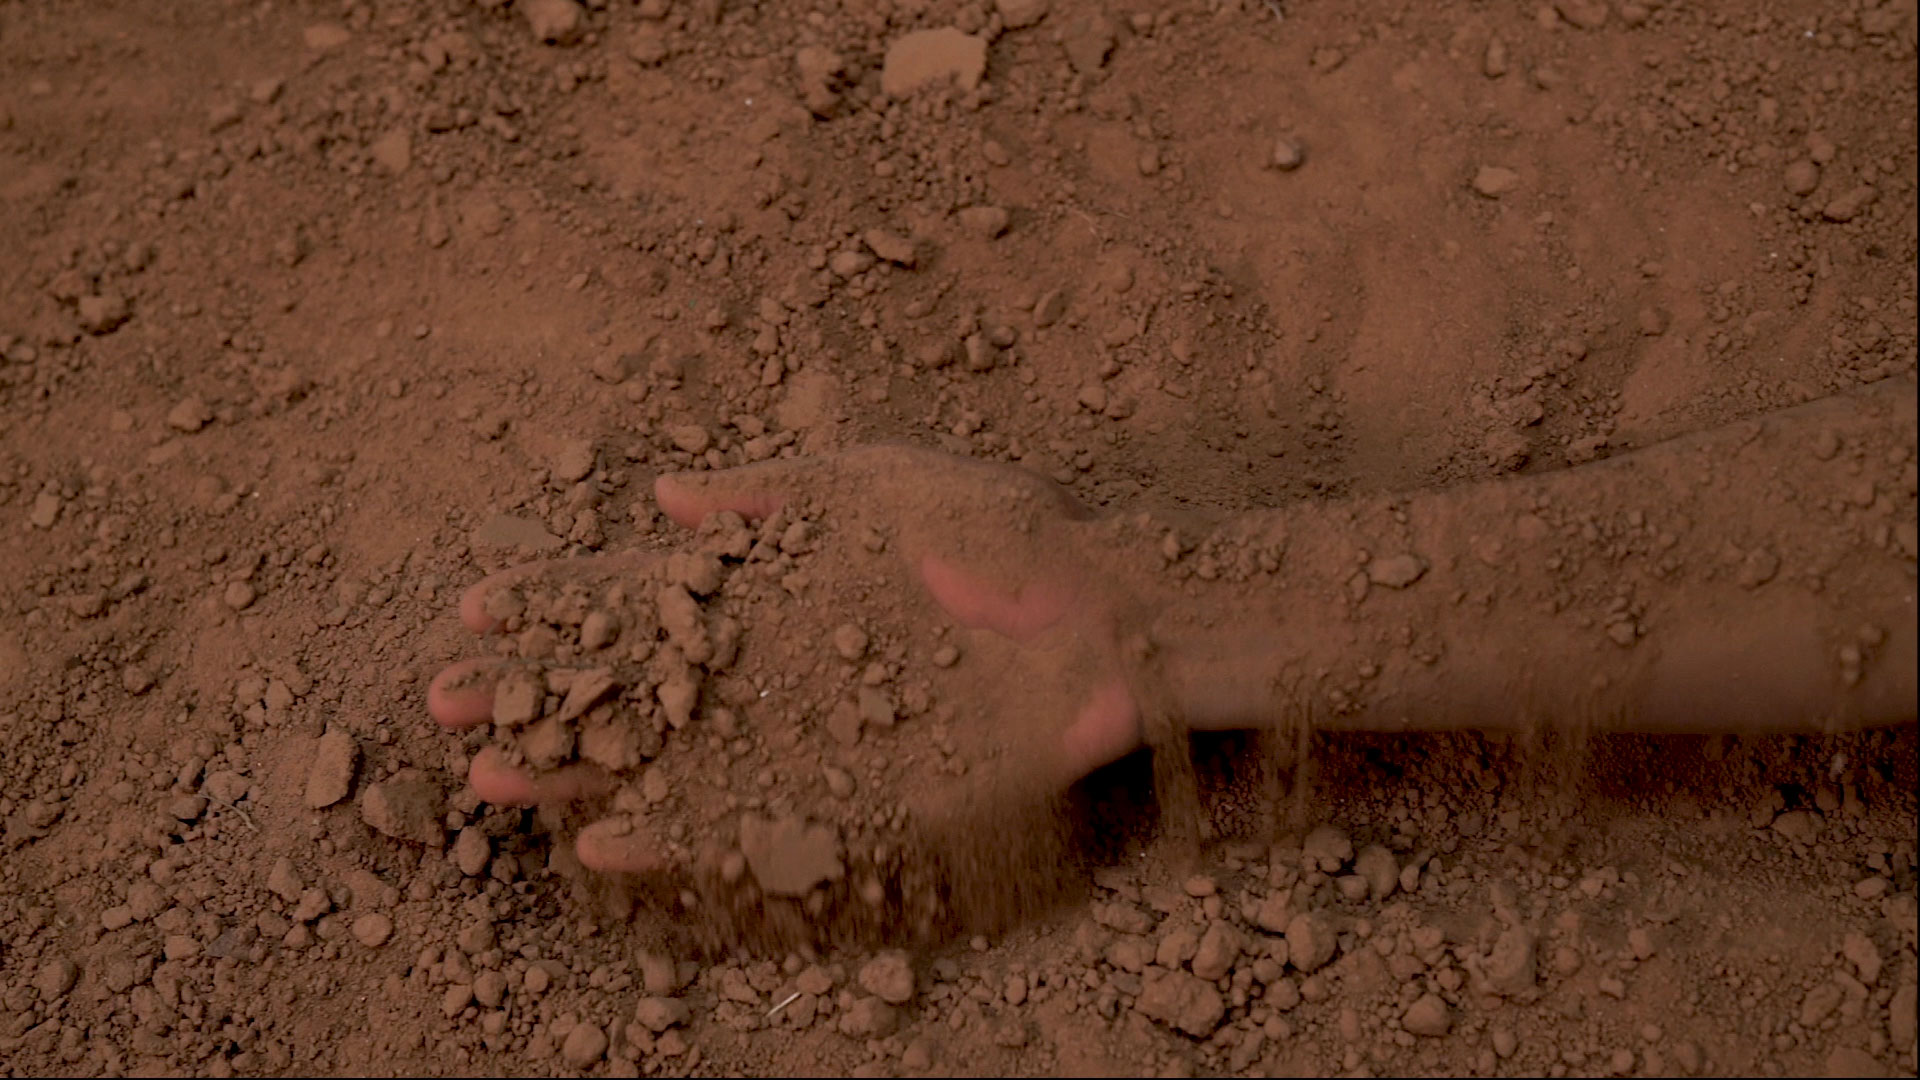 A hand is reaching across, through the dirt and sand.